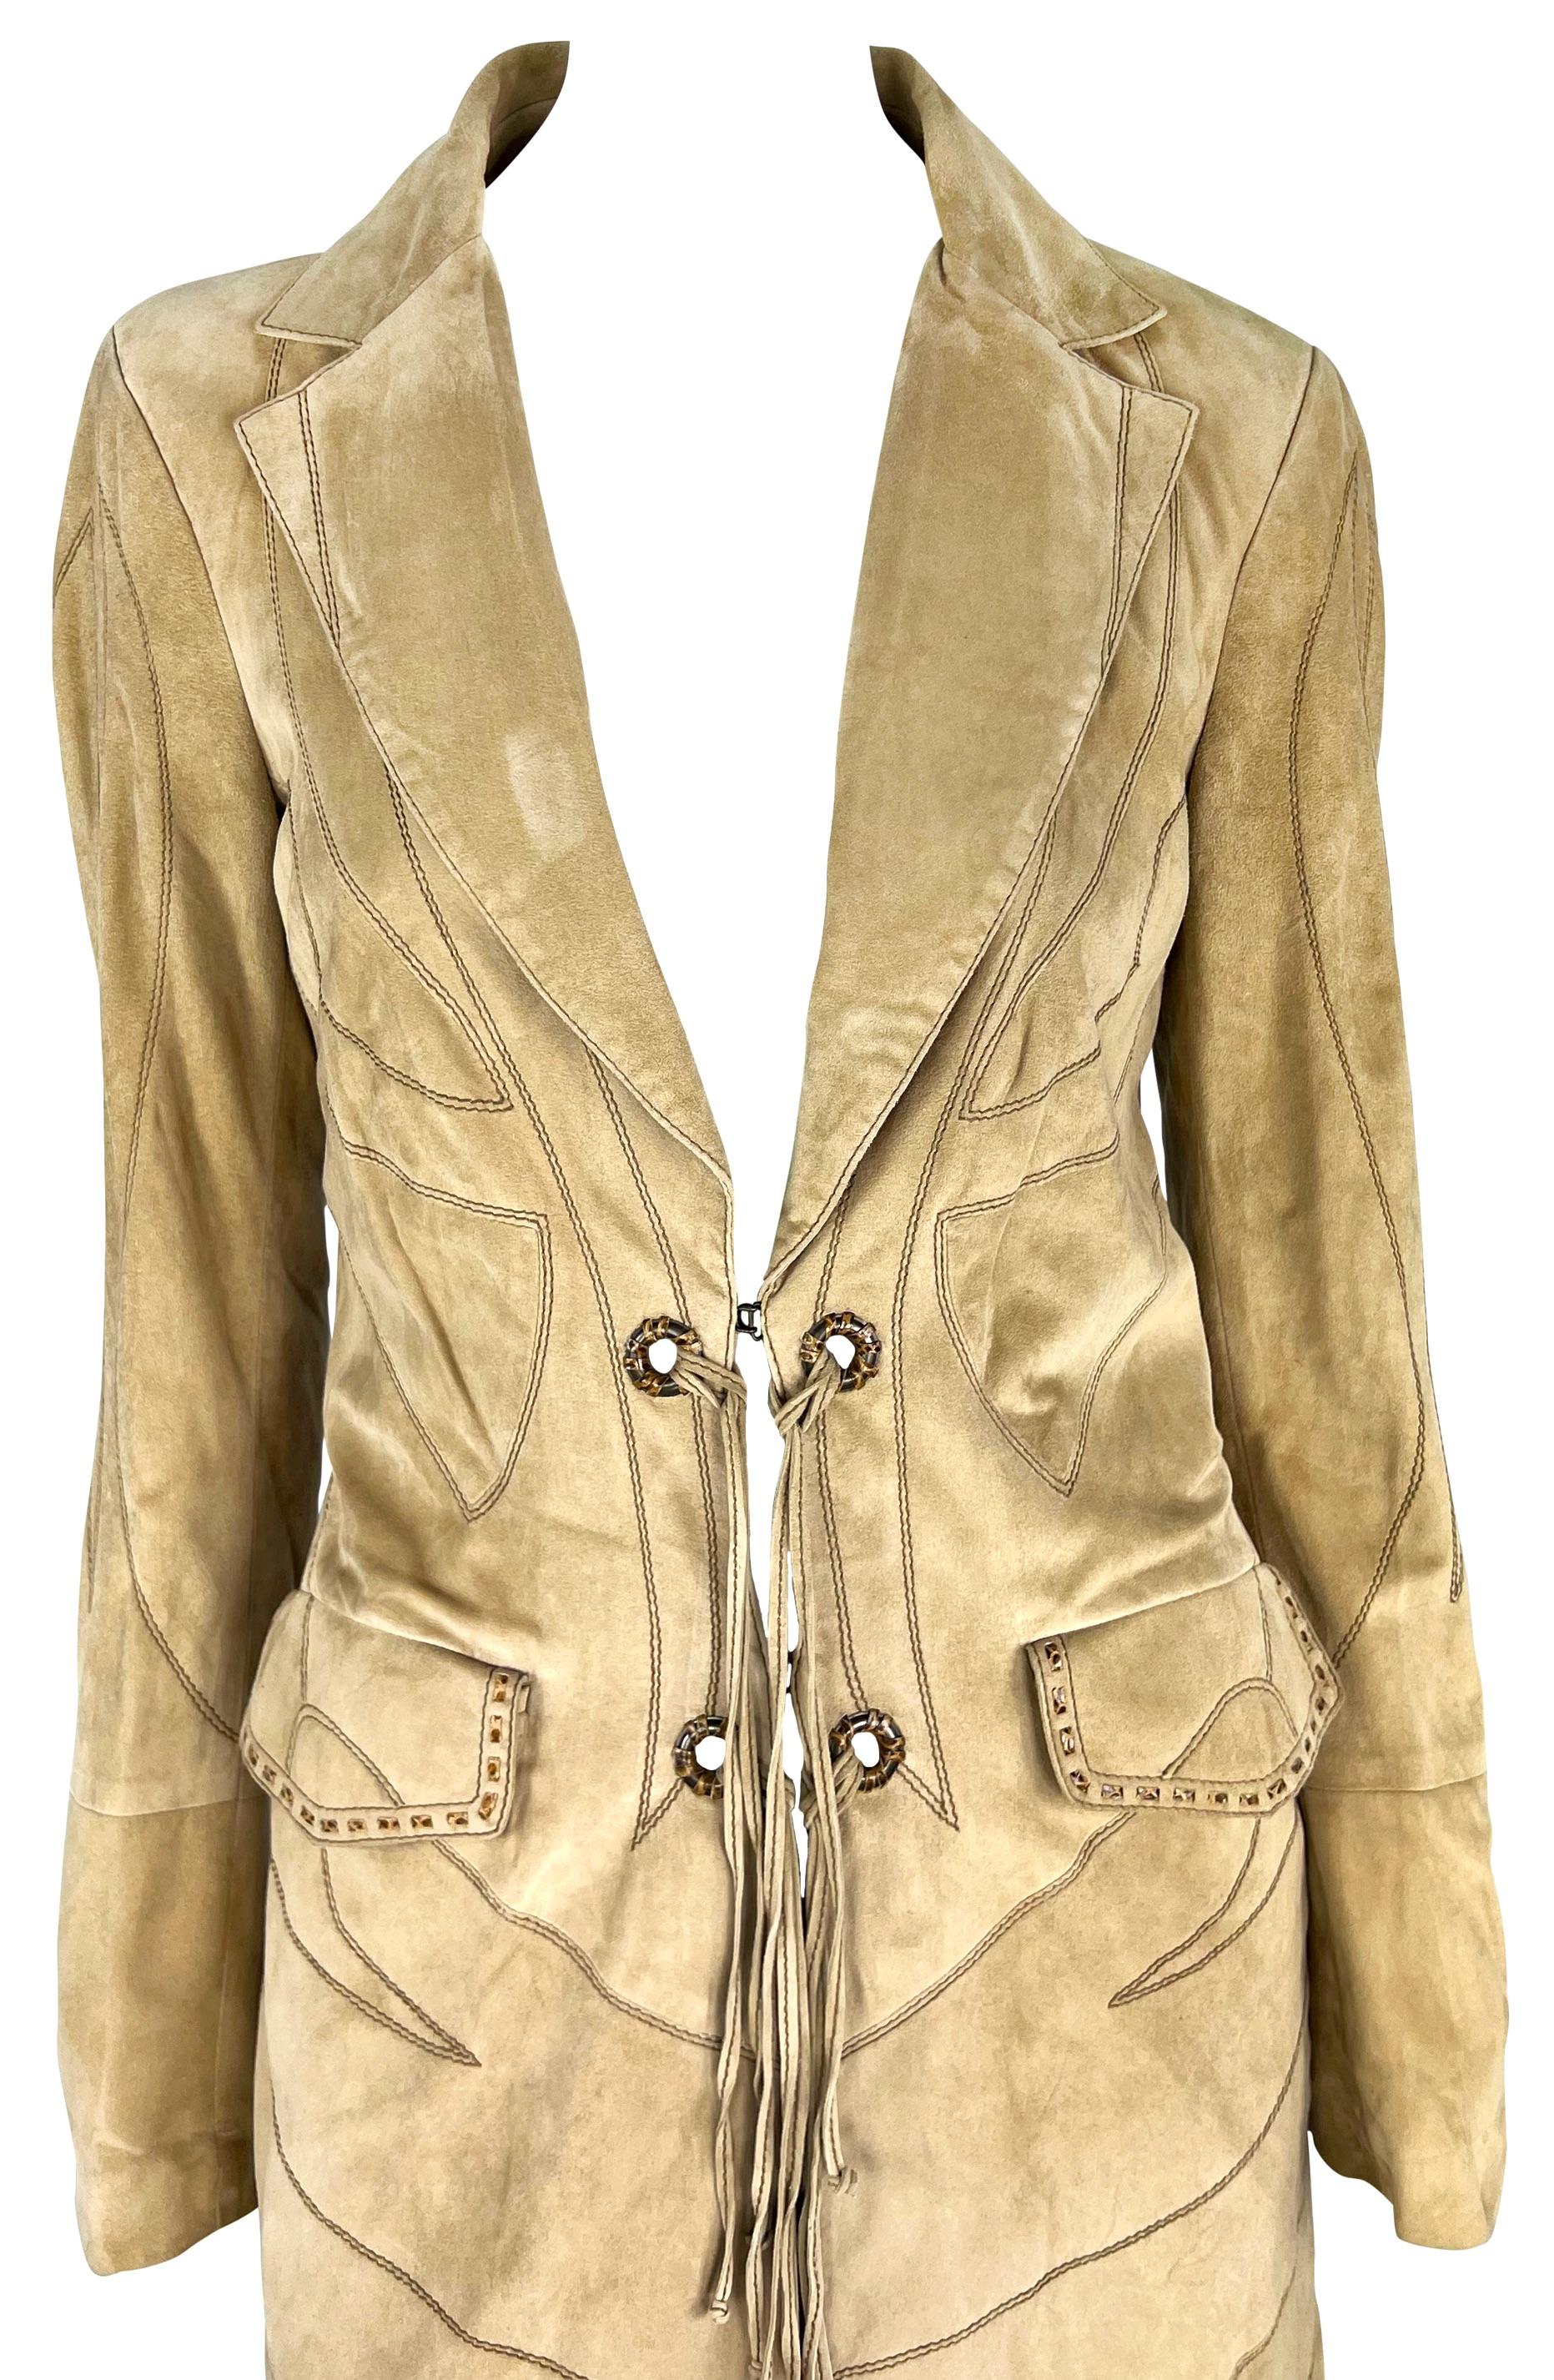 From the Fall/Winter 2007 Roberto Cavalli collection, this American West-inspired coat is constructed entirely of tan suede. The coat is covered in dramatic embroidery and features a fold-over collar, pockets at the hips, snakeskin whipstitch